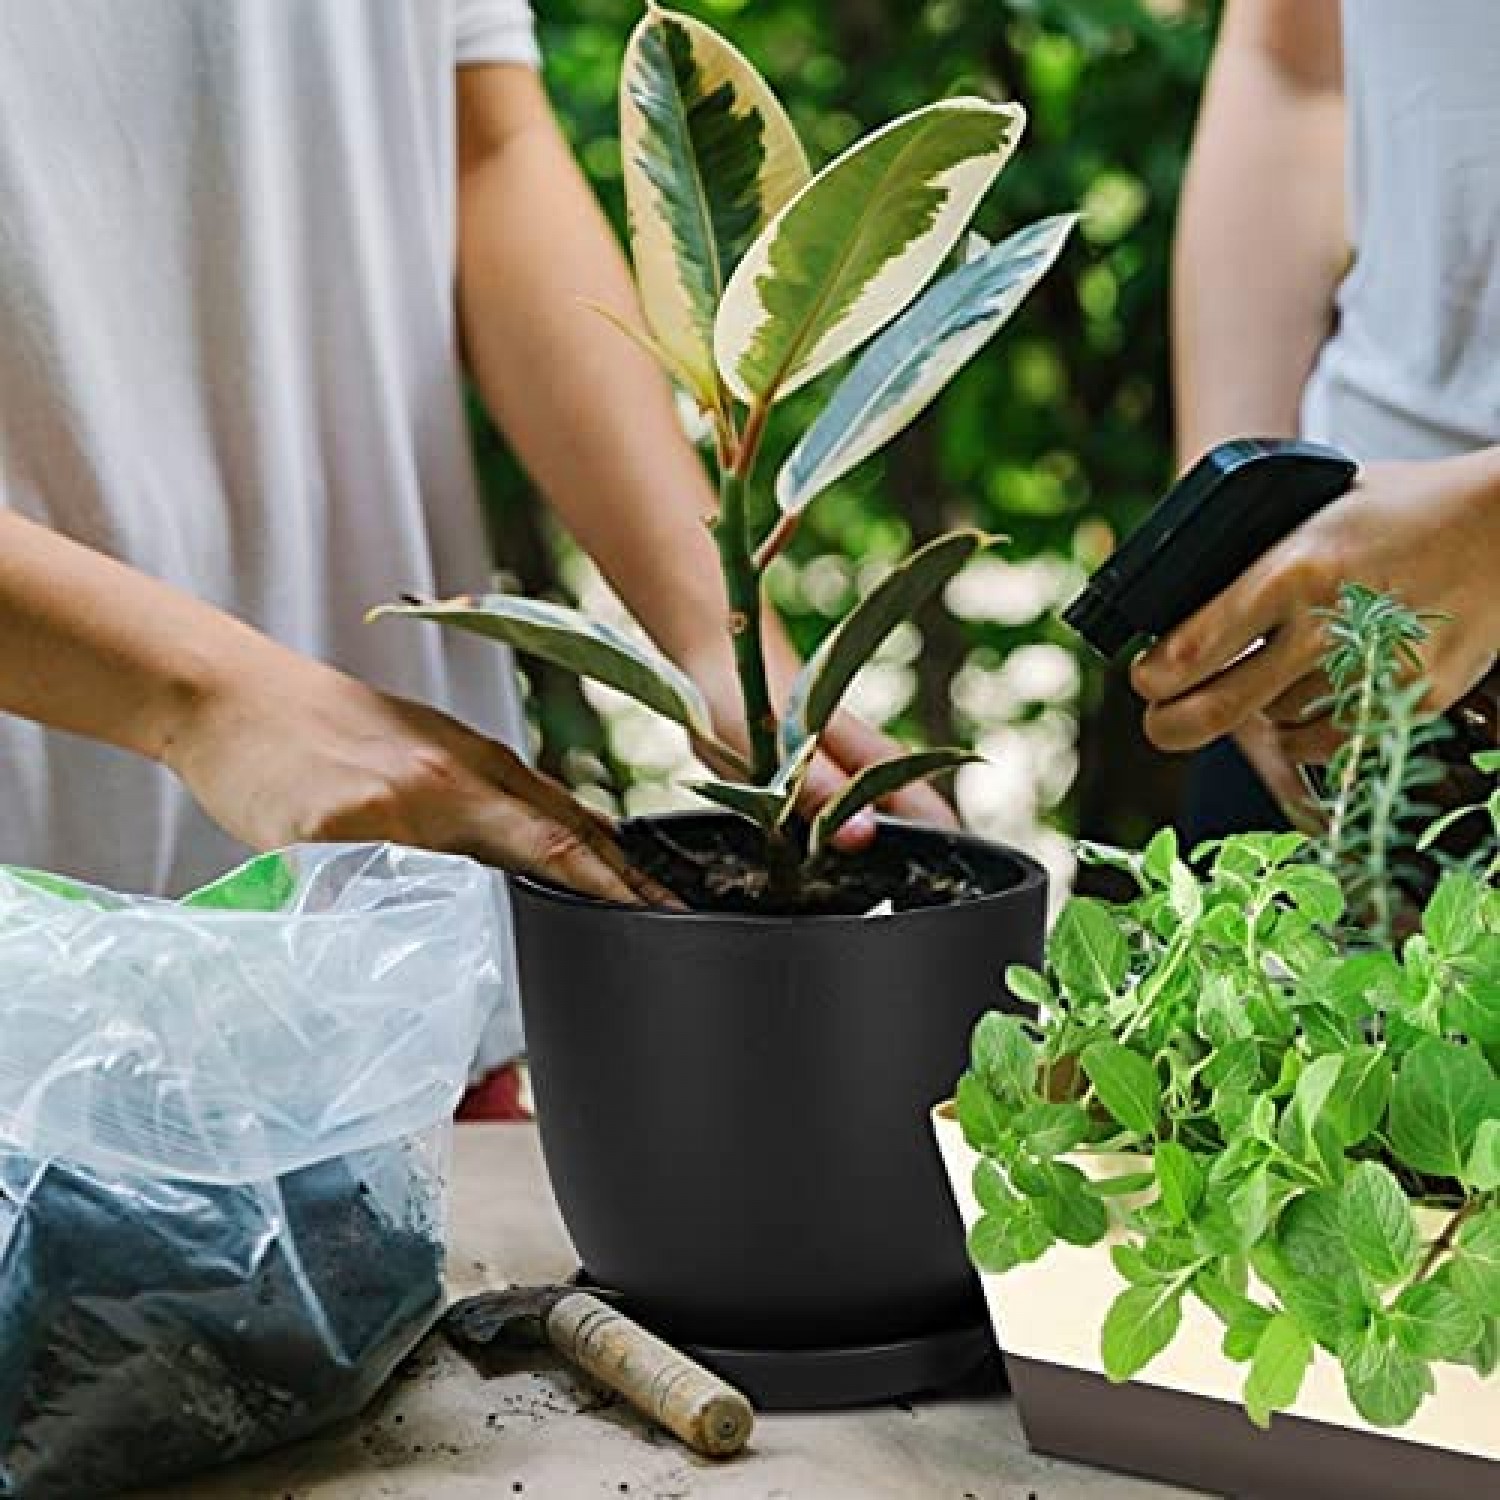 6-Inch Transparent Plastic Planter Plant Nursery Pots with Drainage Hole  Indoor